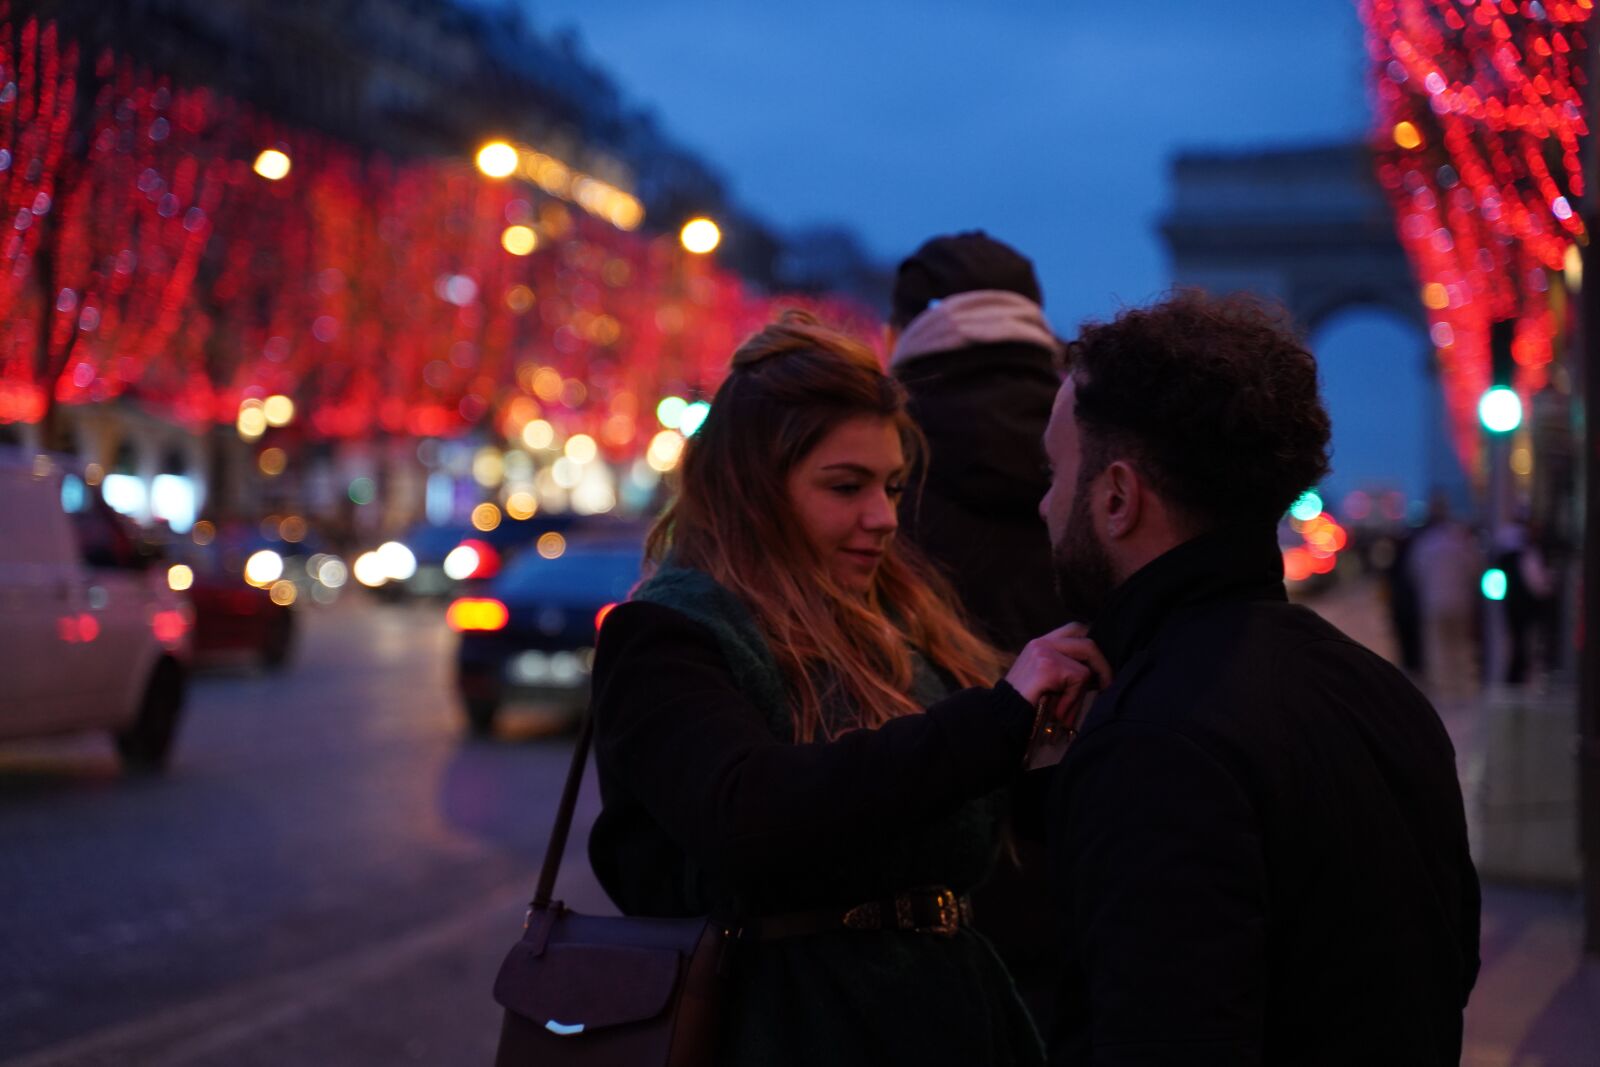 Sony a7 III sample photo. Champs elysees, paris, france photography